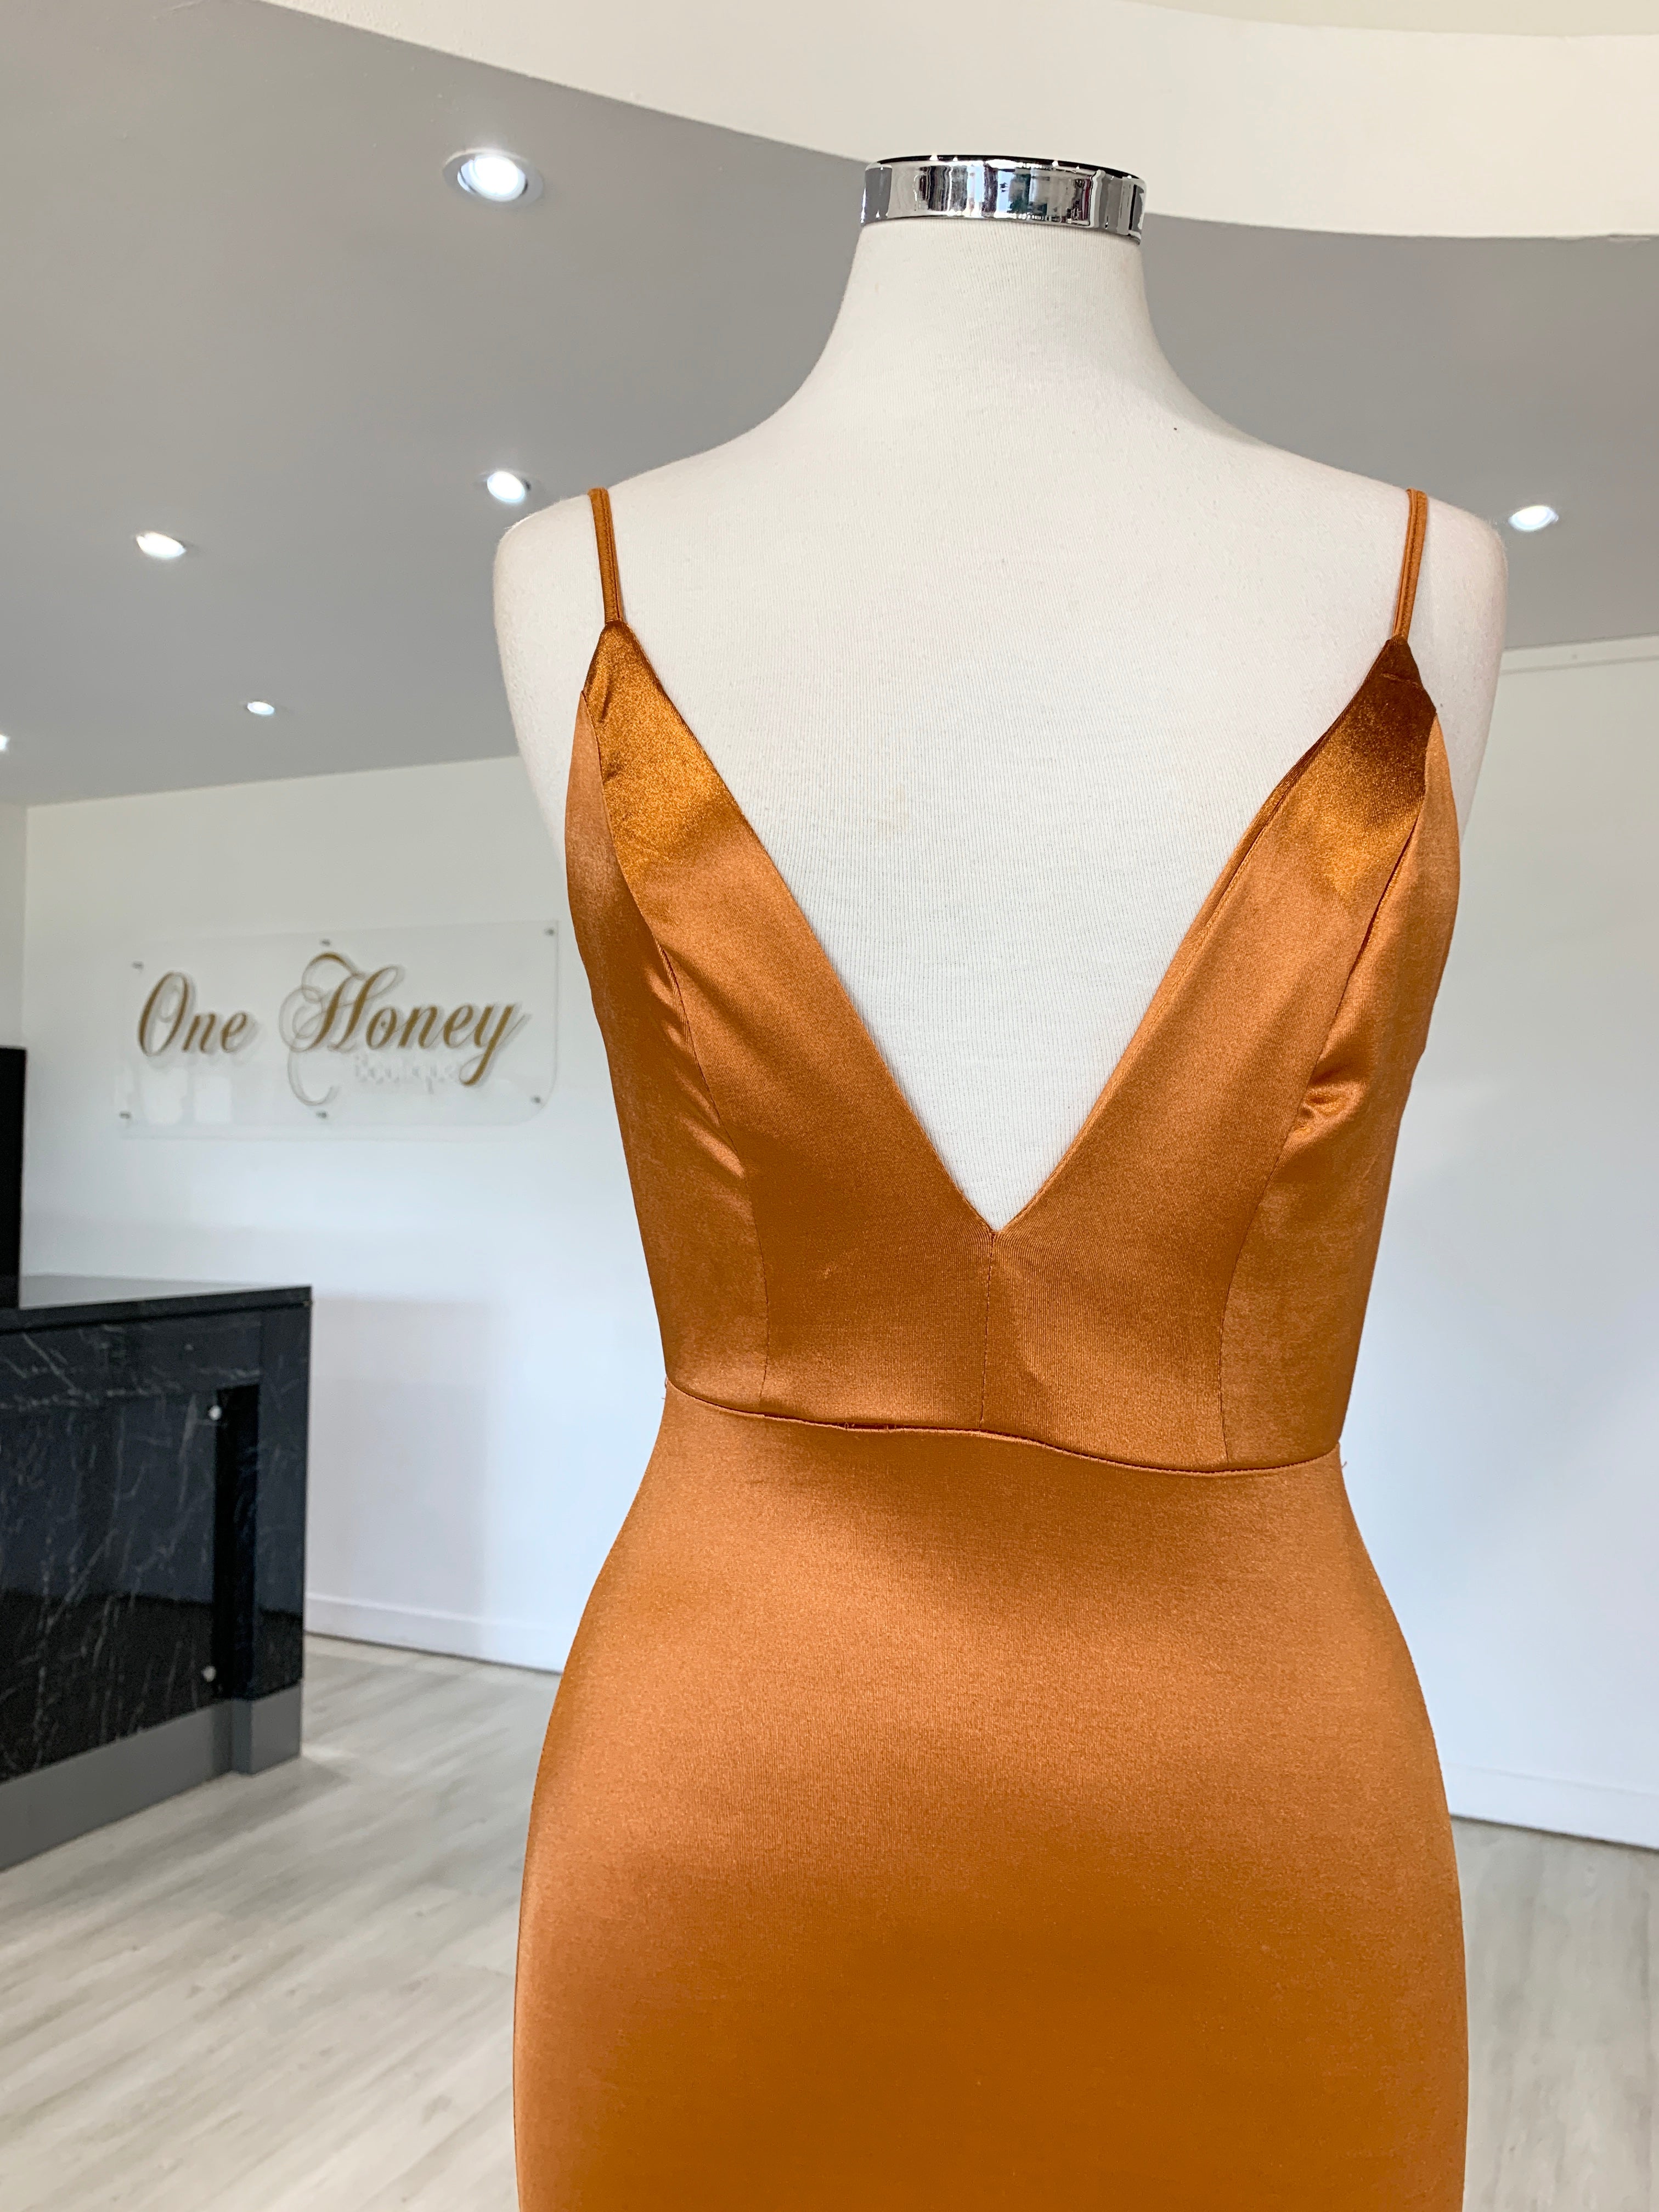 Honey Couture MILEE Burnt Orange Low Back Mermaid Evening Gown Dress {vendor} AfterPay Humm ZipPay LayBuy Sezzle